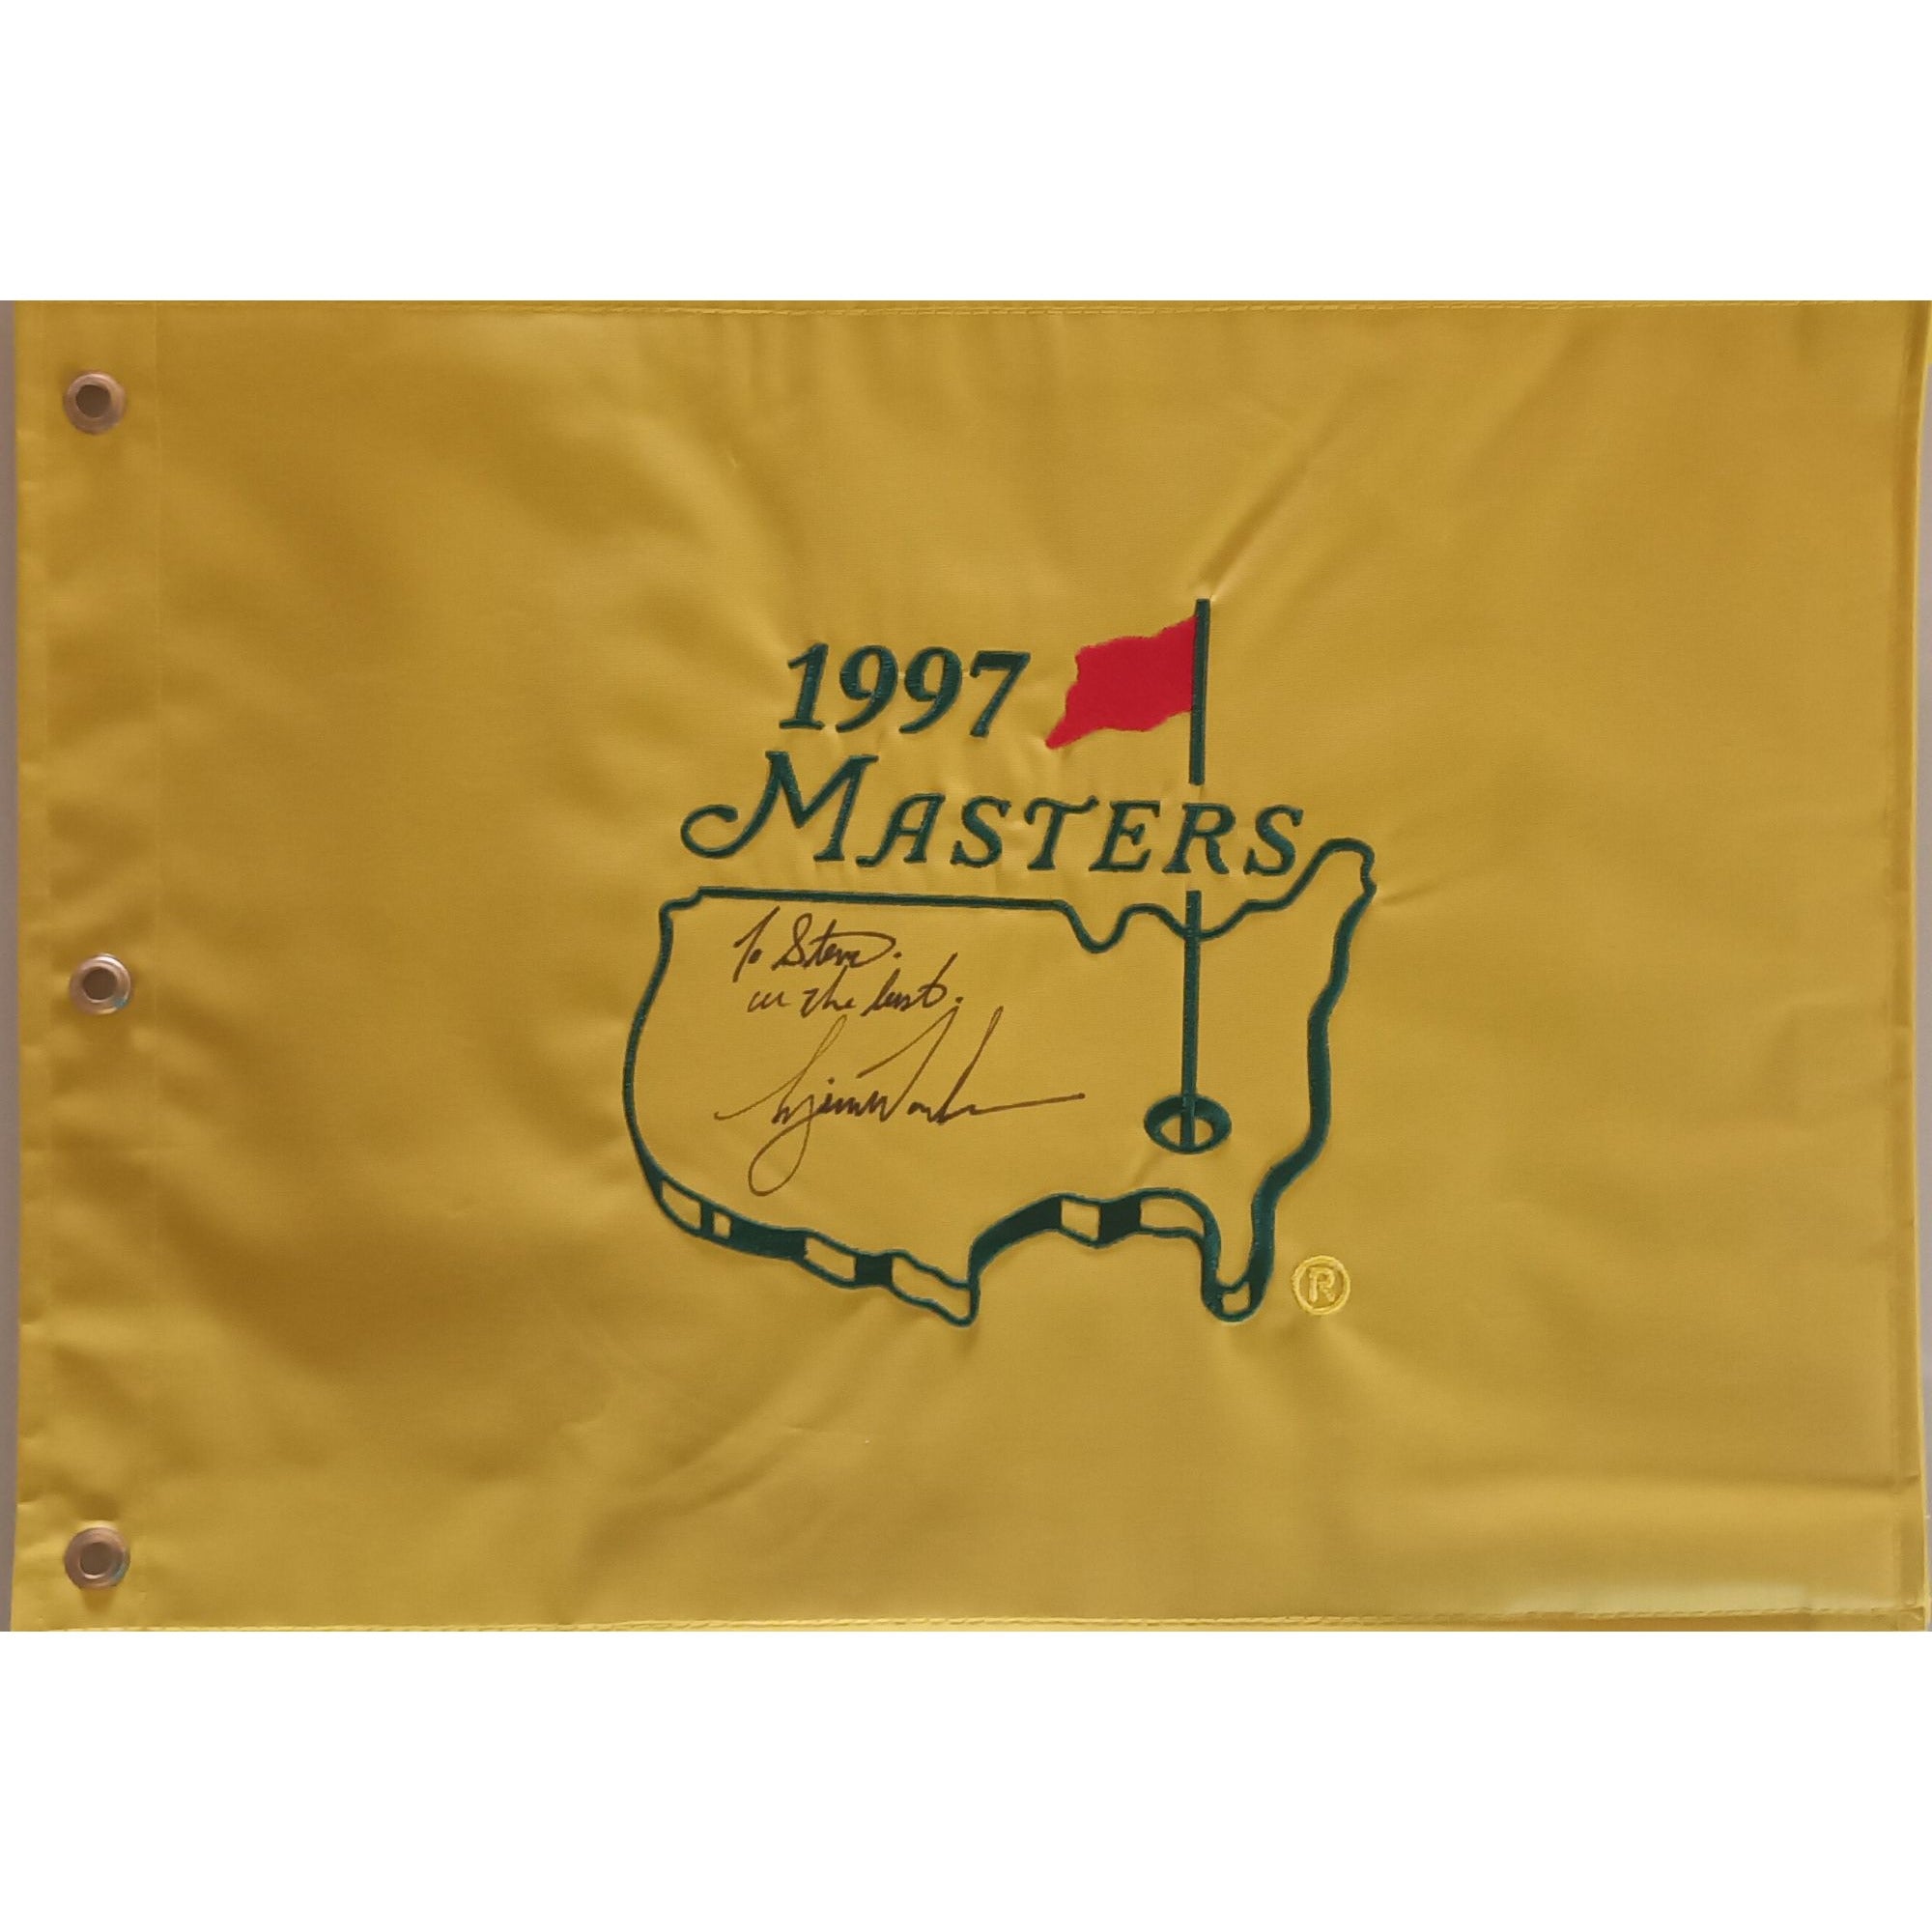 Tiger Woods "To Steve all the best" 1997 Masters Golf pin flag signed with proof